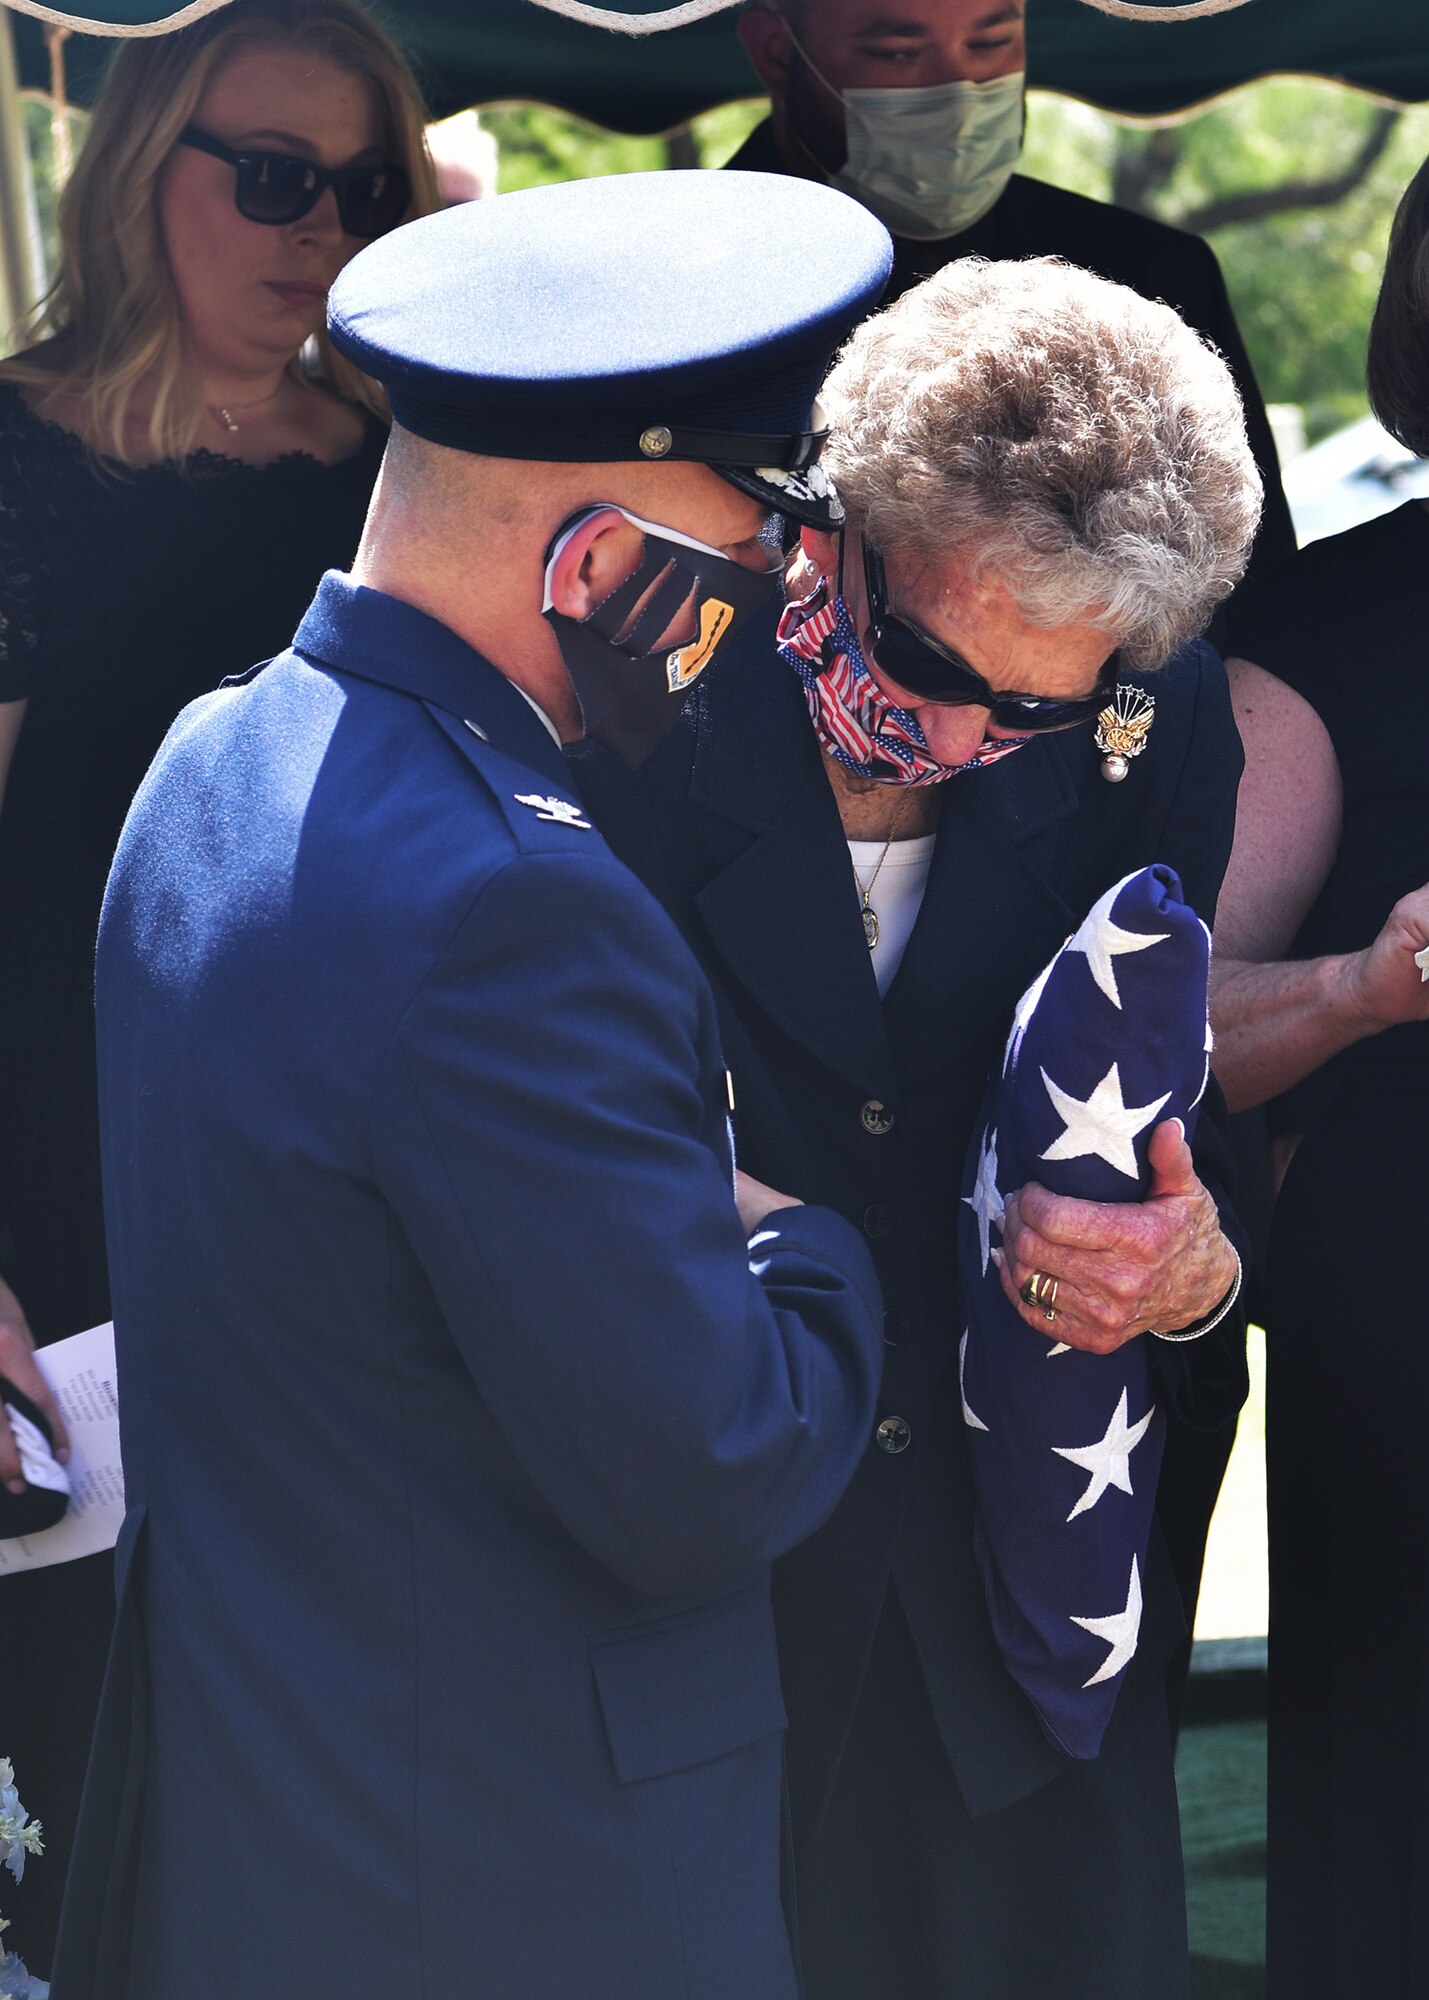 U.S. Air Force Col. Andres Nazario, 17th Training Wing commander, comforts widow JoAnne Powell during the late retired Col. Charles Powell’s funeral at the Fairmont Cemetery, San Angelo Texas, July 8, 2020. Powell served as a commander at Goodfellow Air Force Base and was a prominent figure within San Angelo.(U.S. Air Force photo by Staff Sgt. Chad Warren)